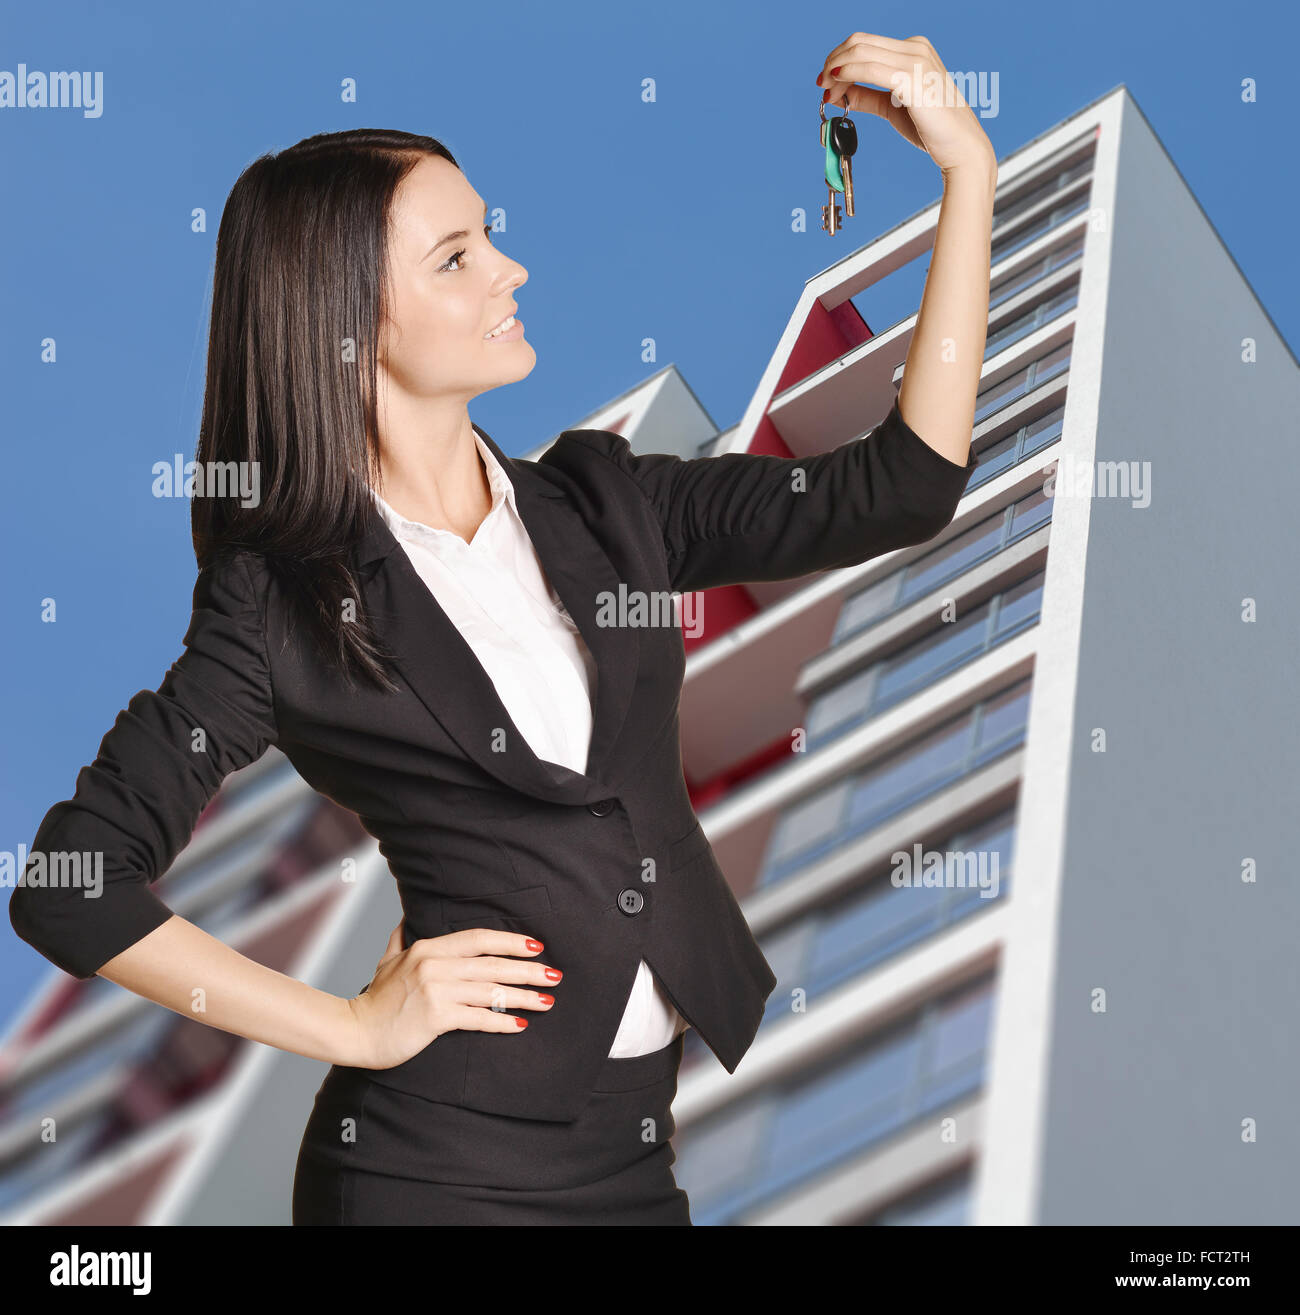 Woman standing on background of building and is holding keys from apartment Stock Photo